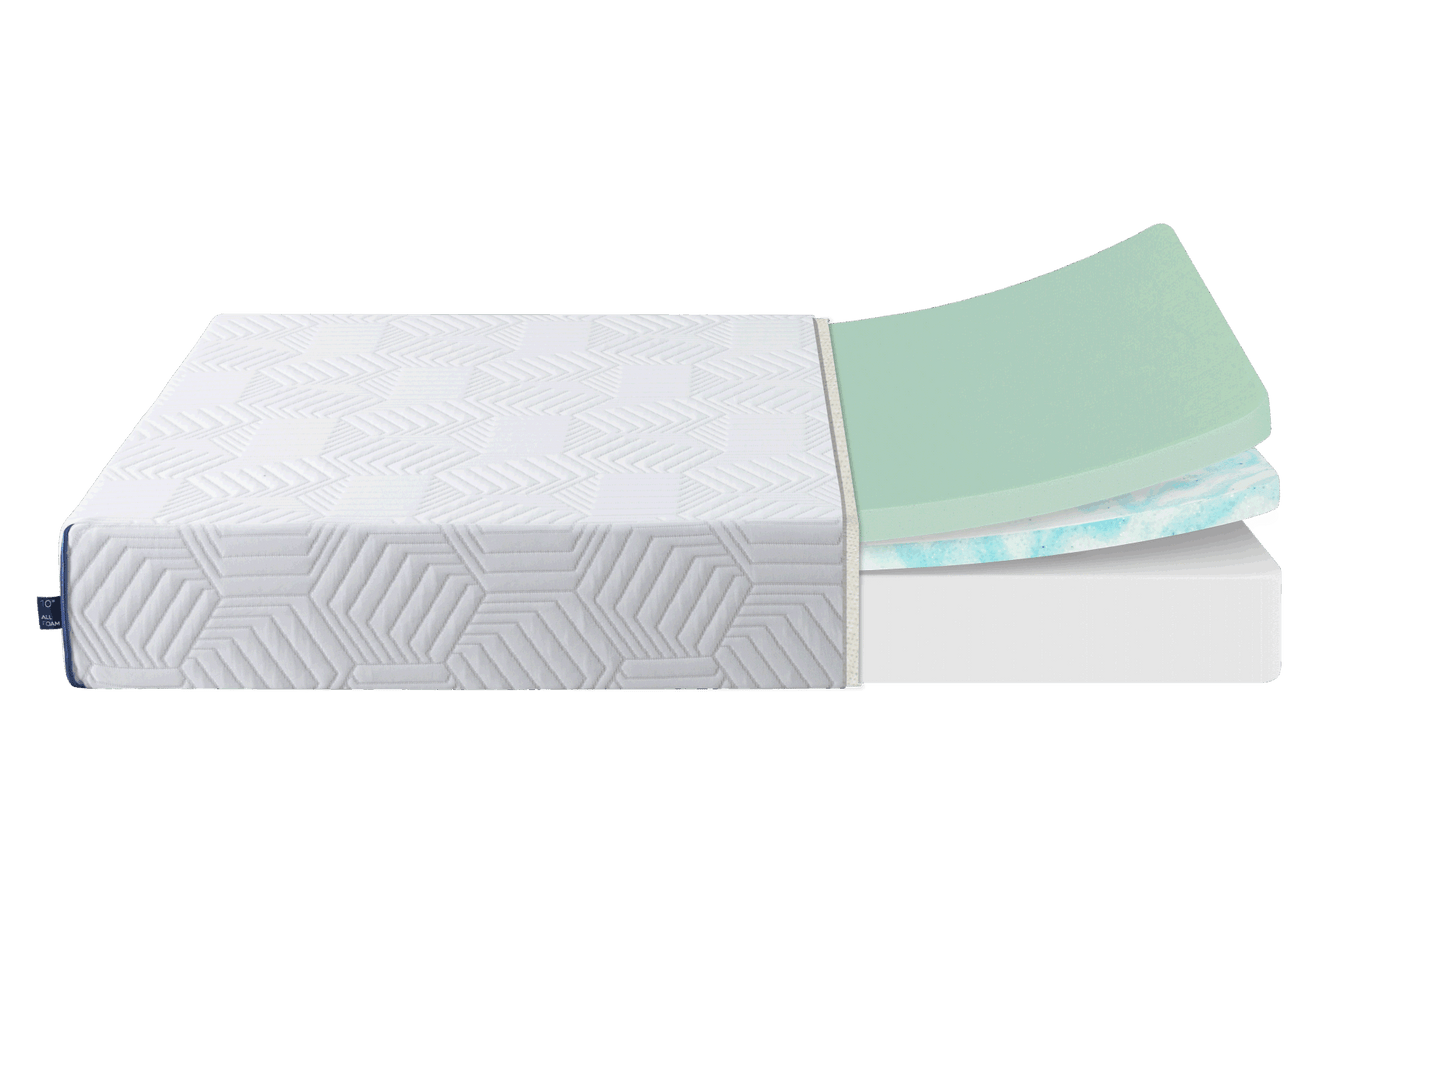 twin 12 inch gel memory foam mattress, white, bed in a box, green tea and cooling gel infused, certipur-us certified